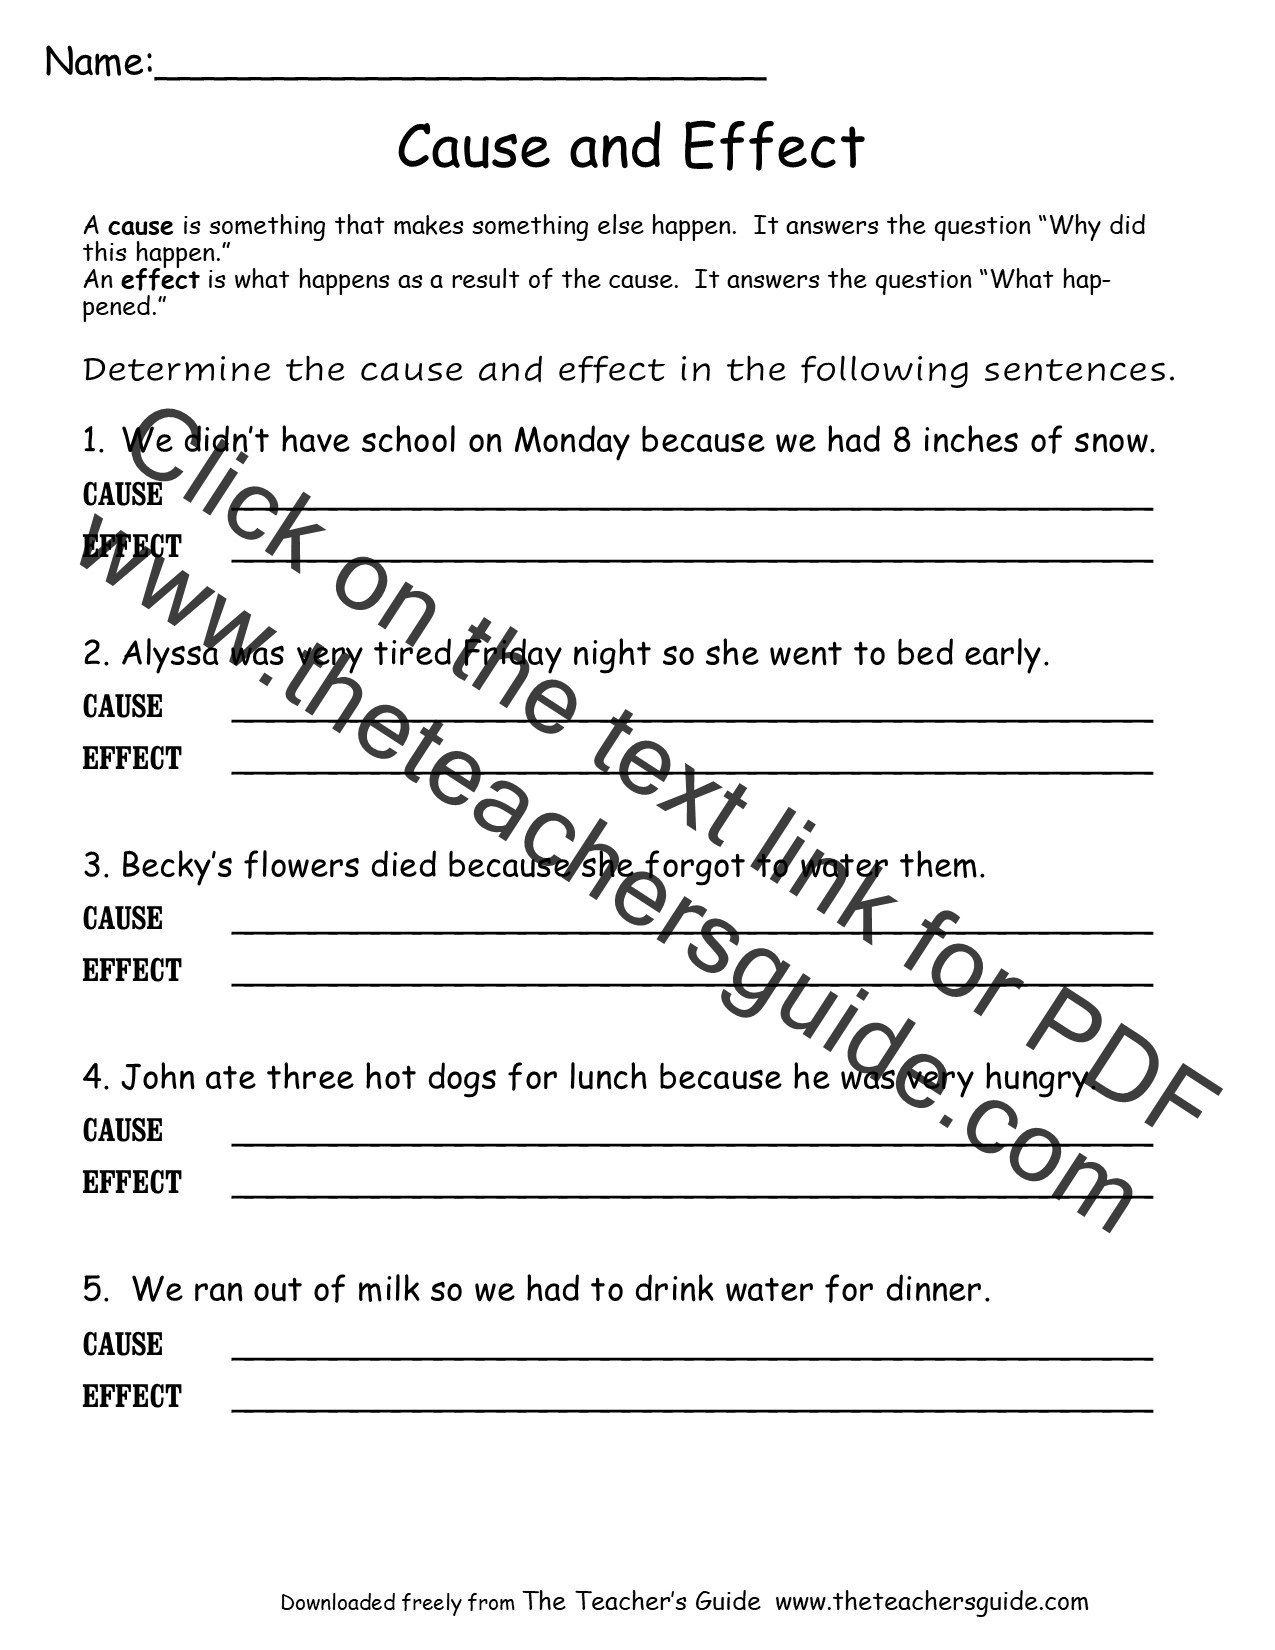 Cause And Effect Worksheets From The Teacher s Guide